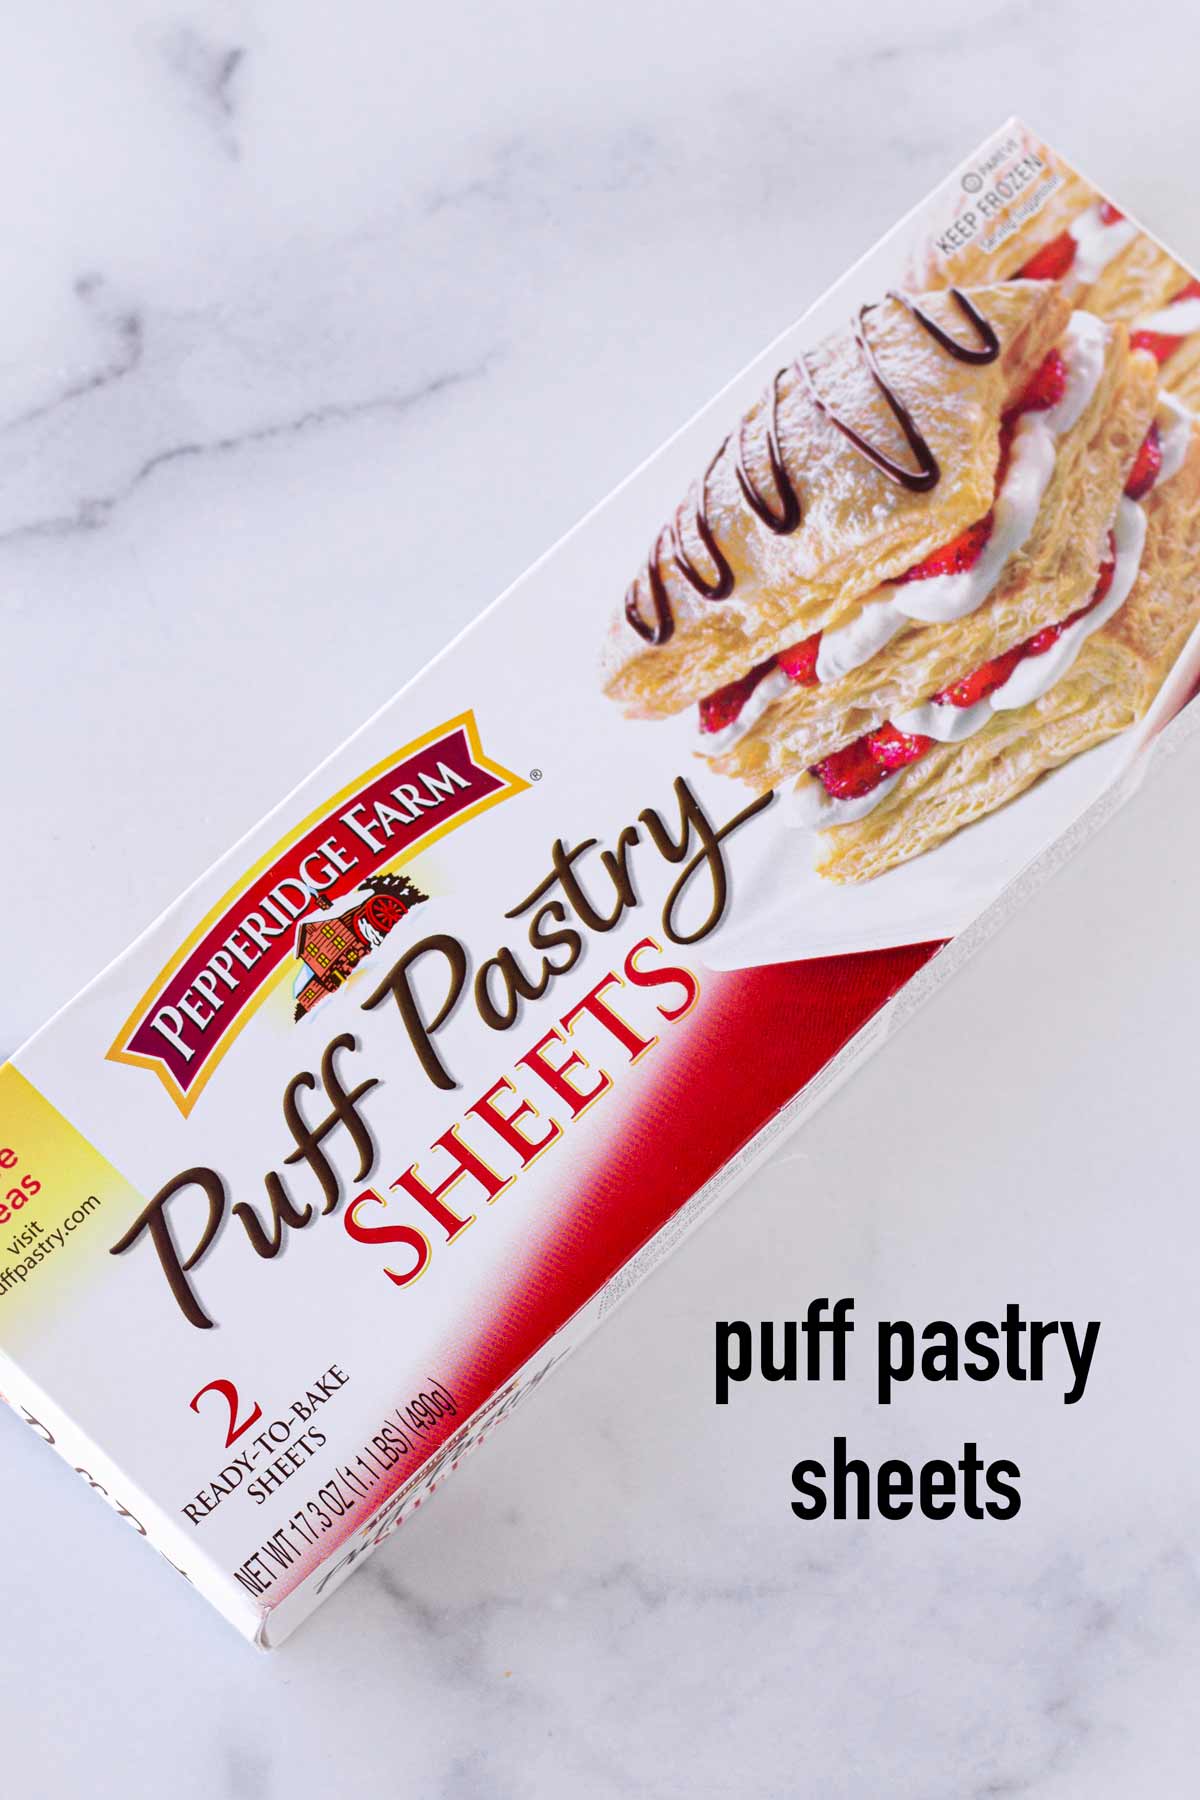 a box of puff pastry sheets